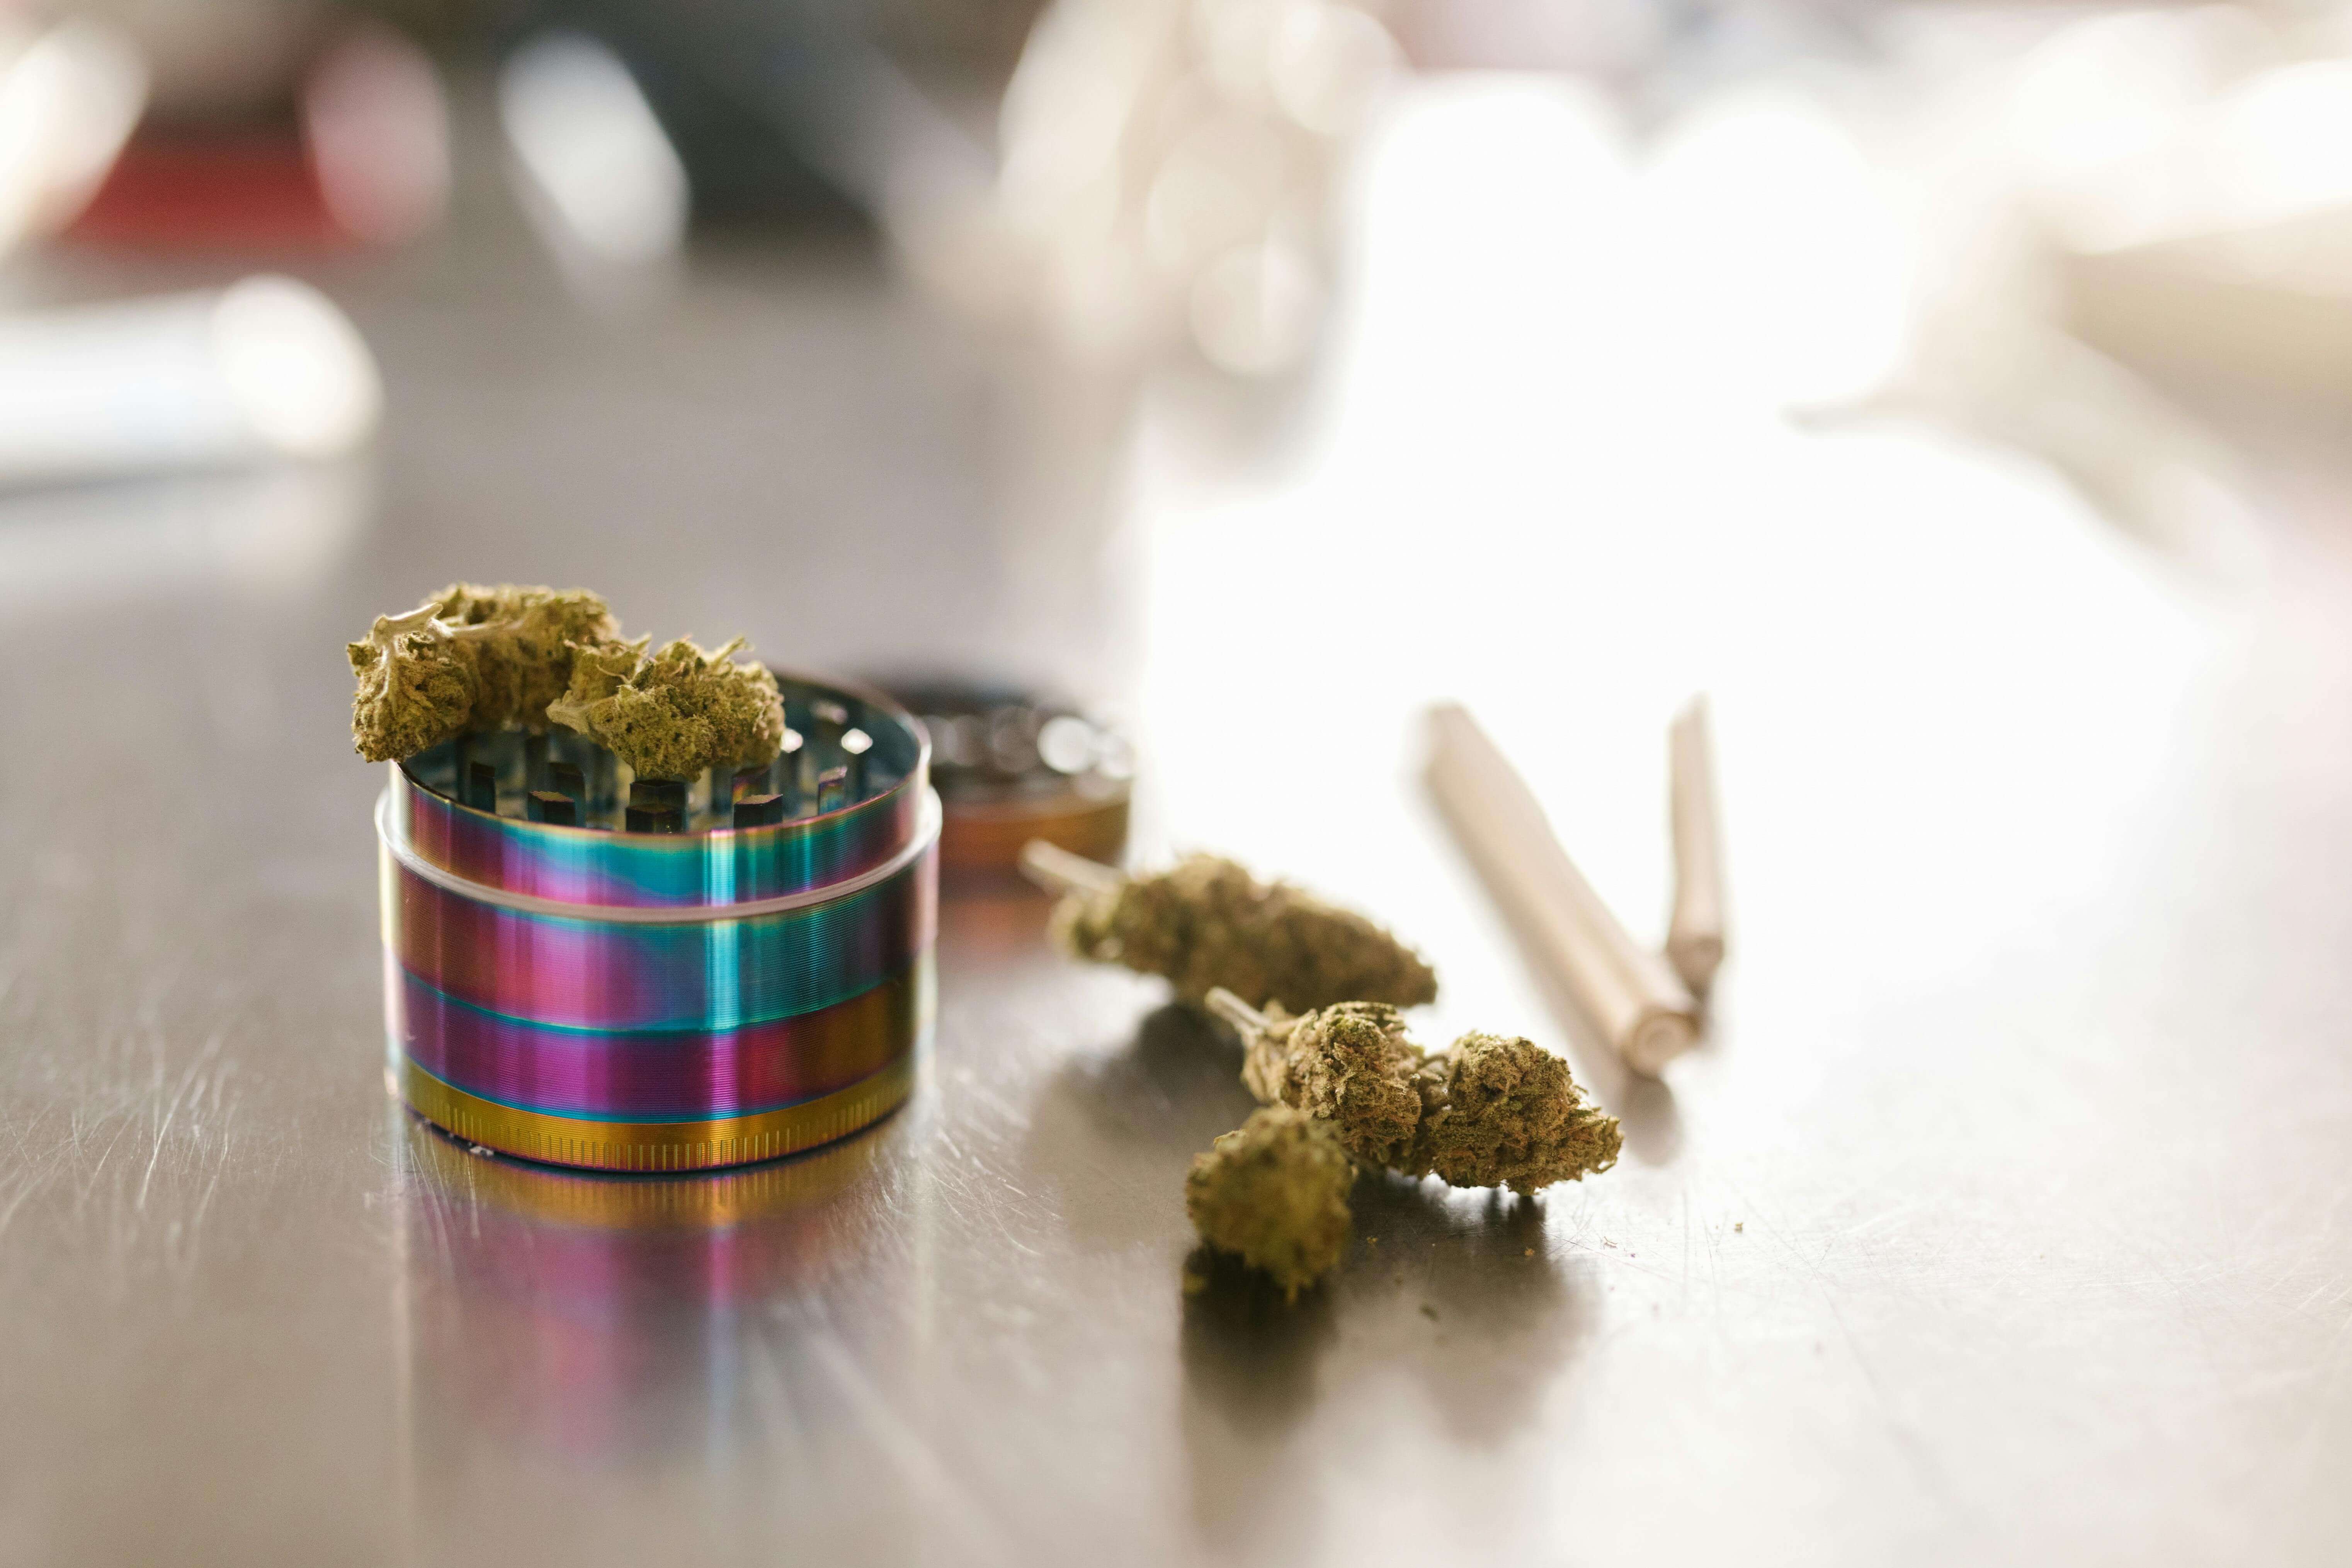 A colorful cannabis grinder